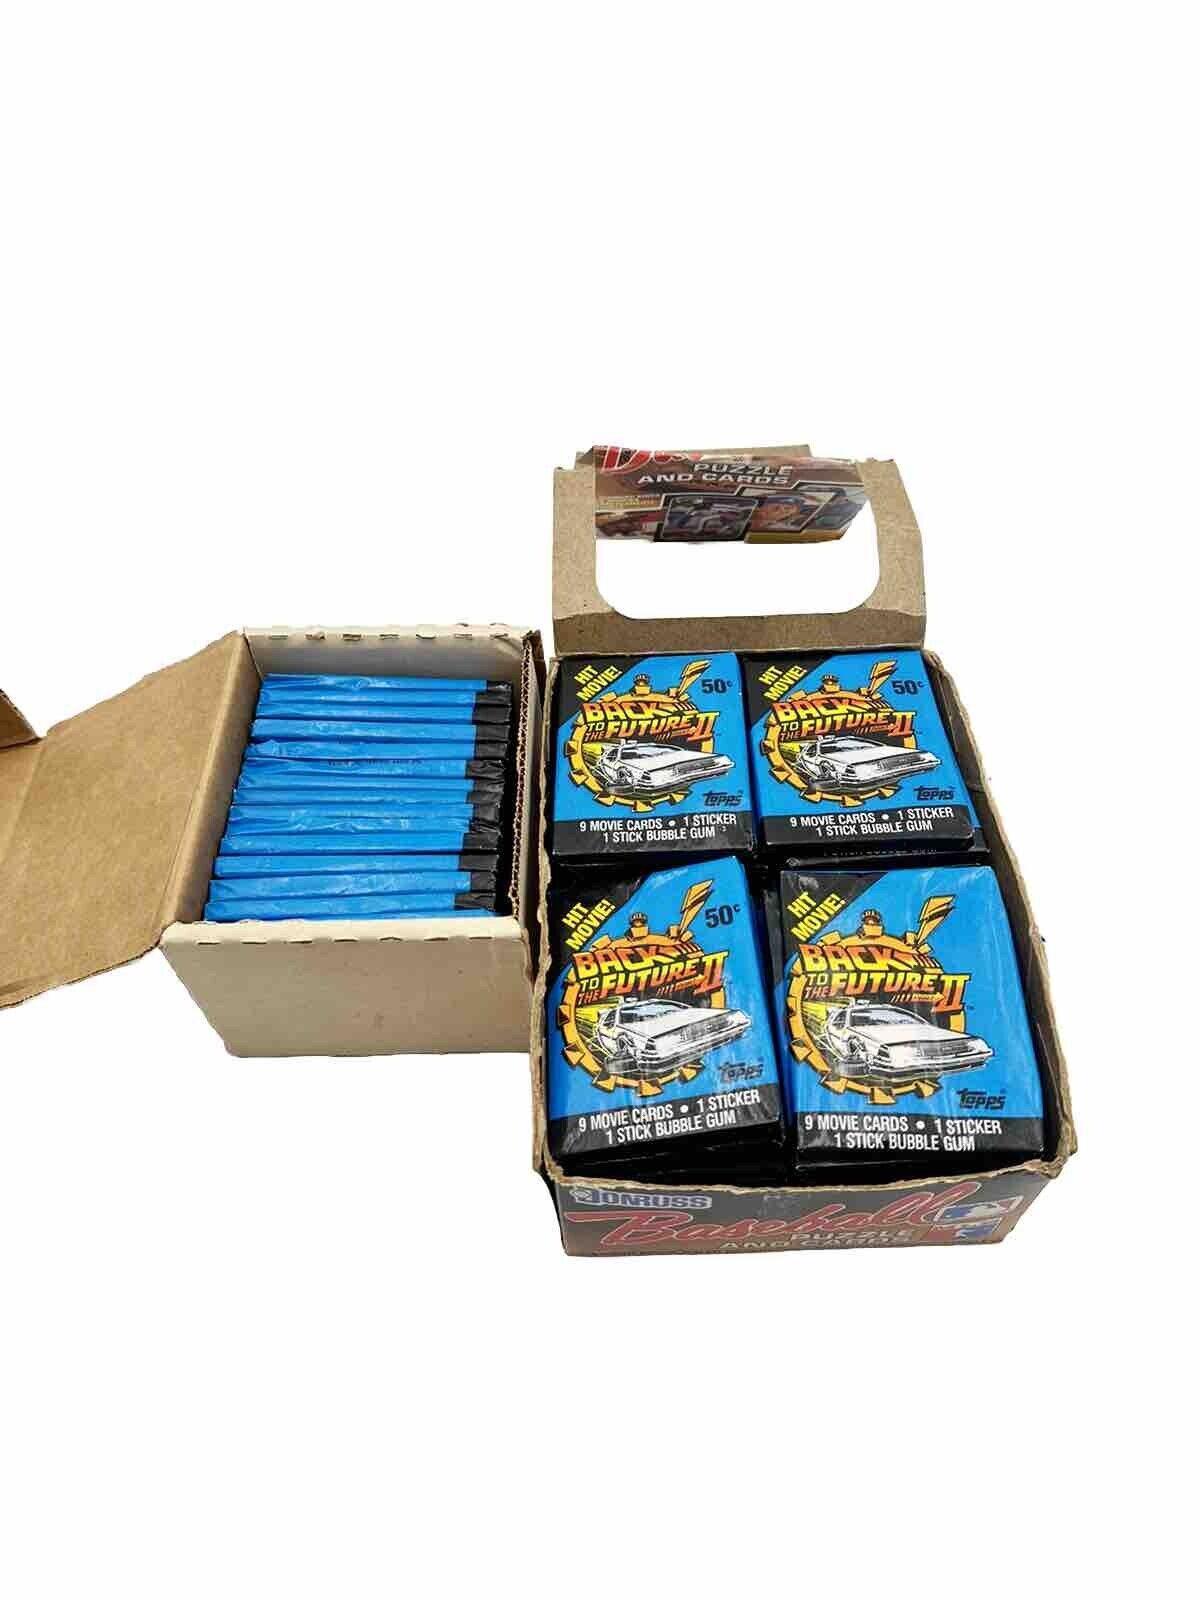 Back to the Future II 1989 Topps Lot of 54 Sealed Wax Trading Card Packs B18